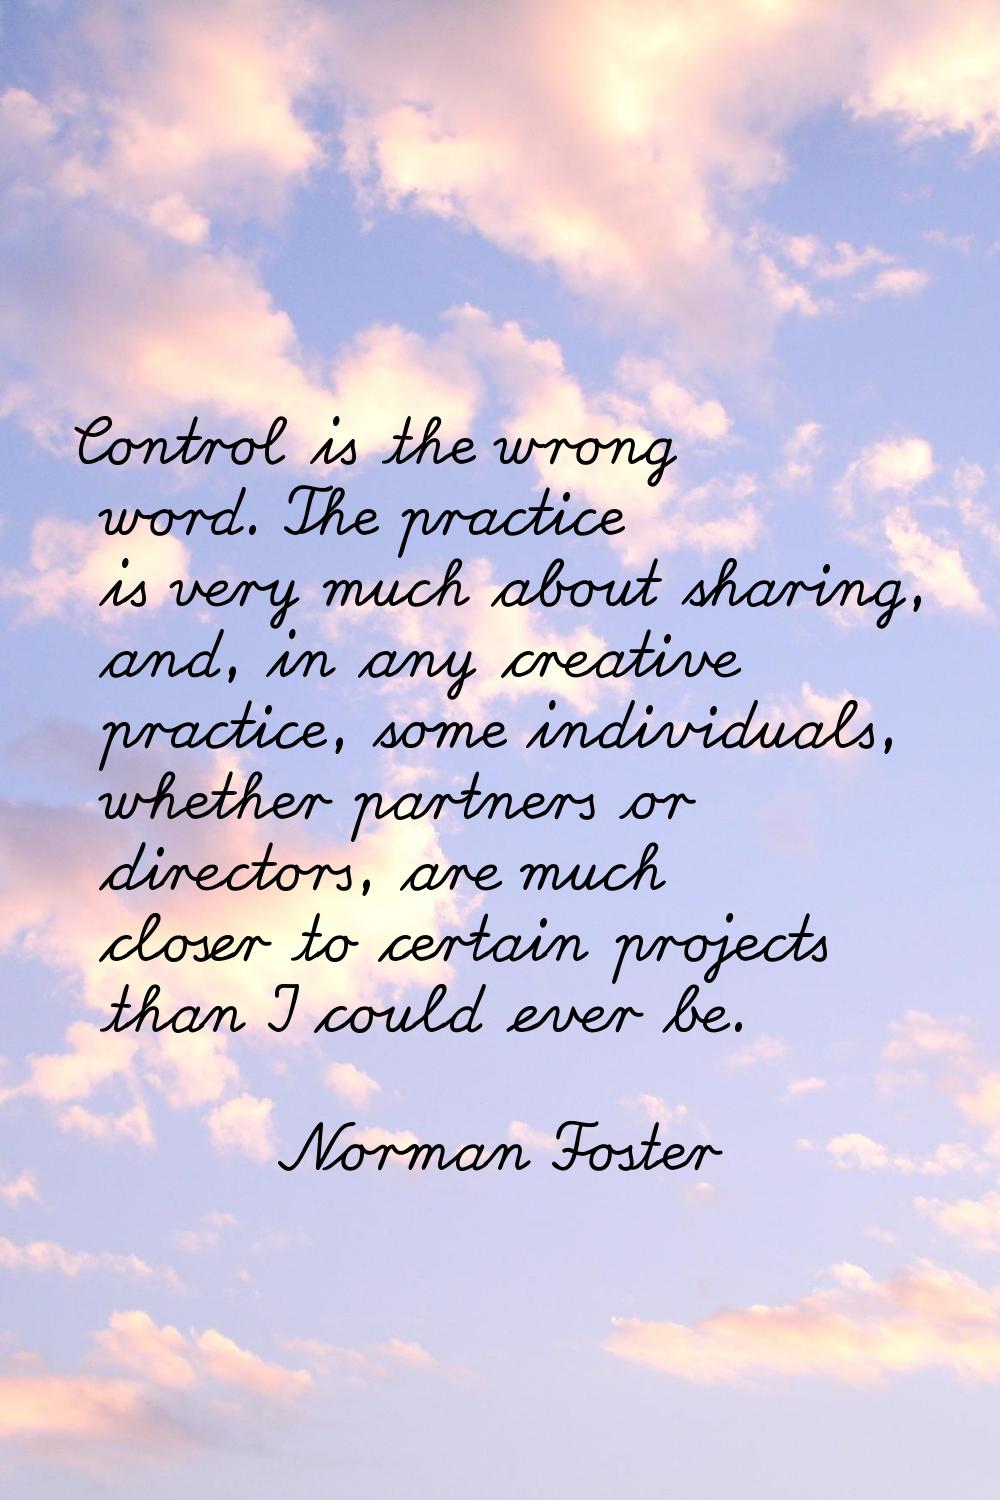 Control is the wrong word. The practice is very much about sharing, and, in any creative practice, 